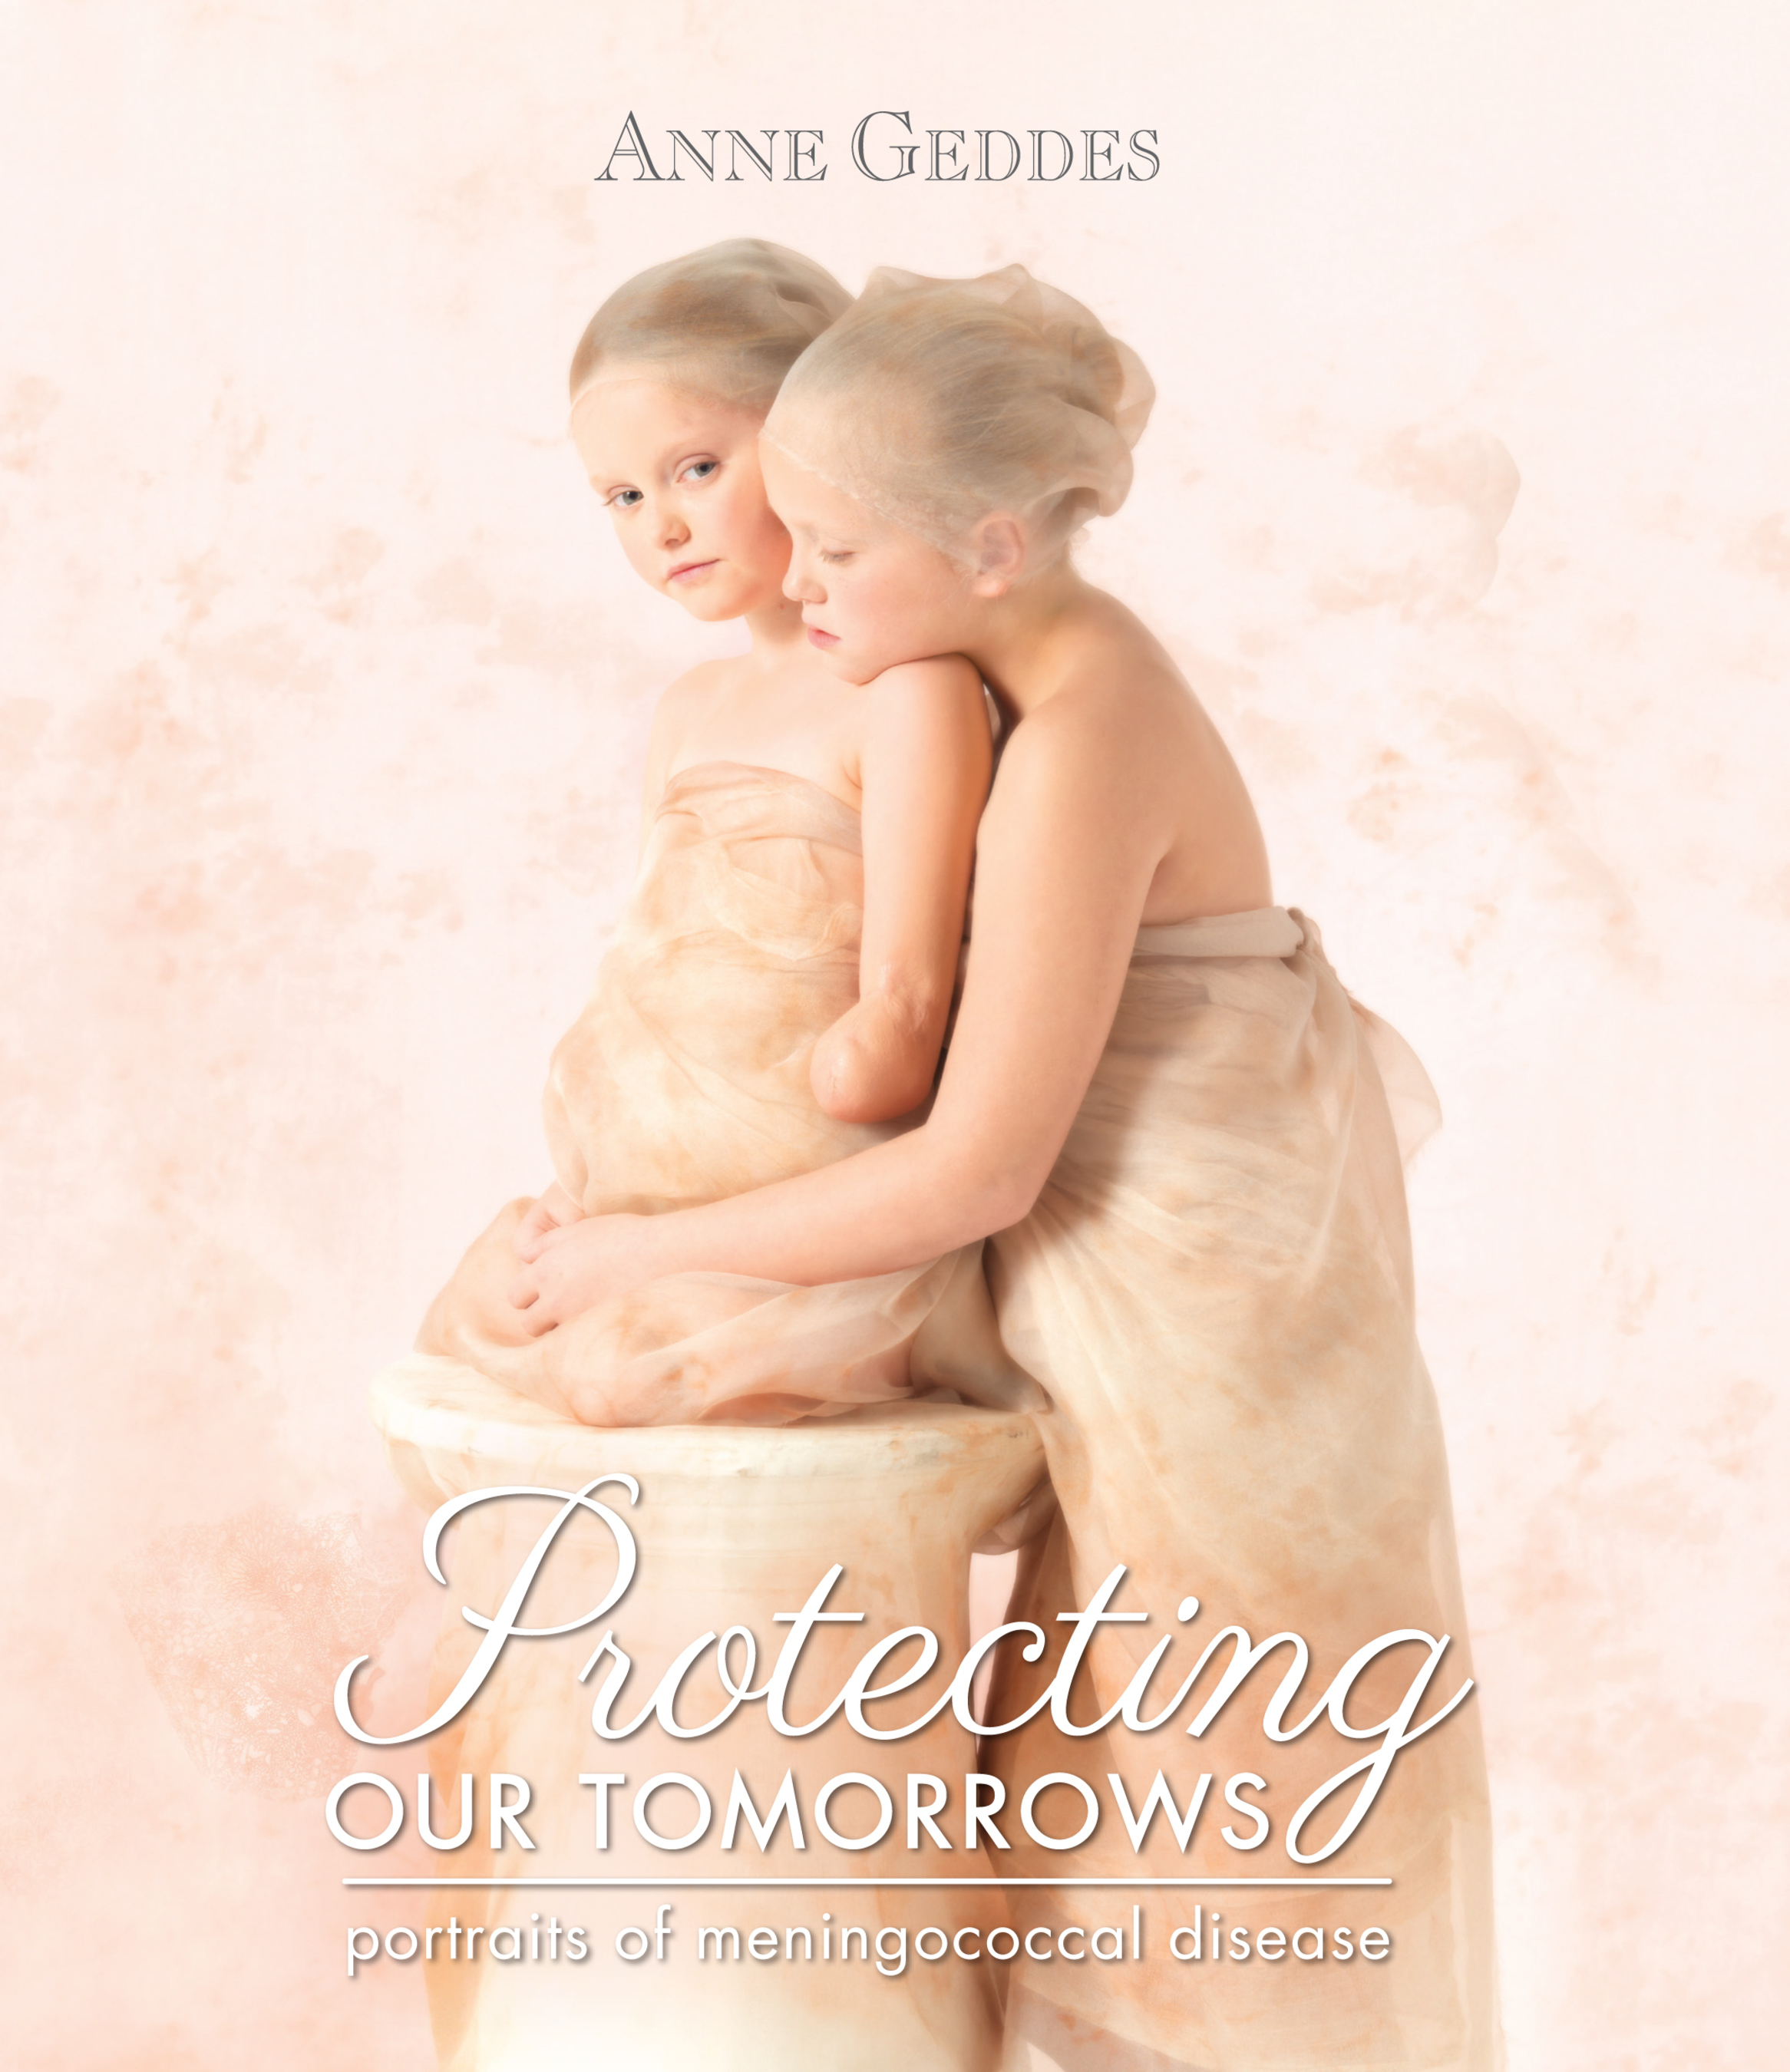 Anne Geddes Unveils New Book Highlighting the Courage and Promise of Meningococcal Disease Survivors in Honor of World Meningitis Day (PRNewsFoto/Anne Geddes)